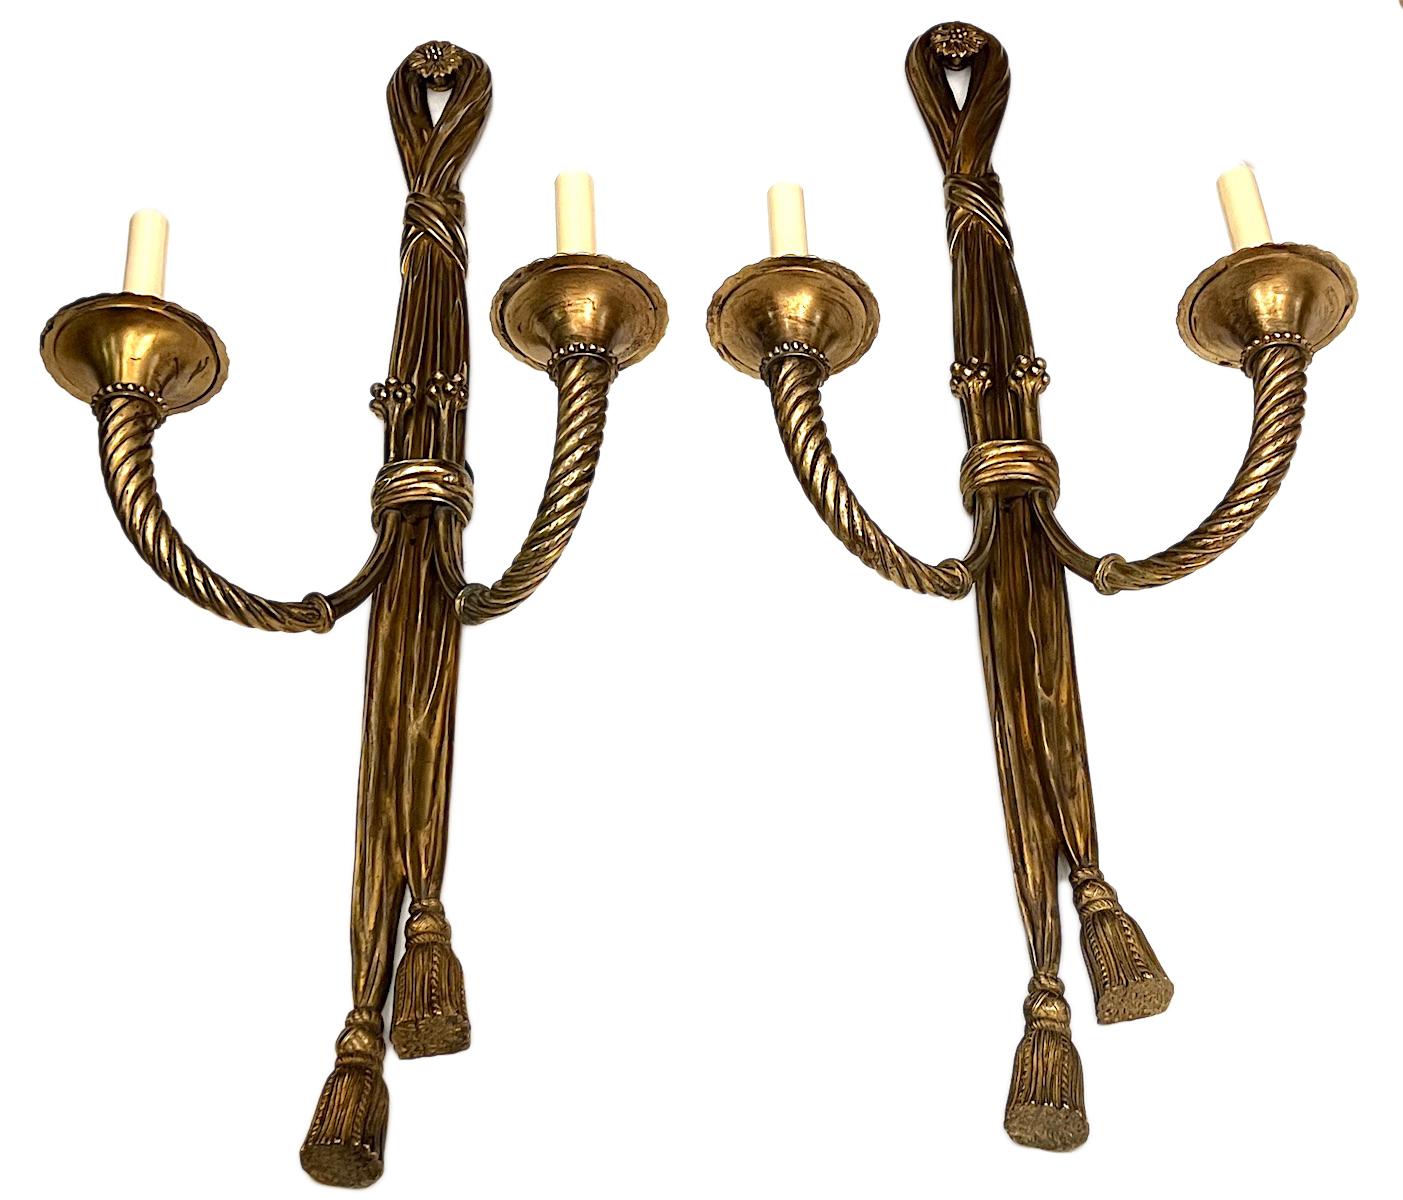 Pair oflarge circa 1920's French cast bronze sconces with original patina.

Measurements:
Height: 33.5